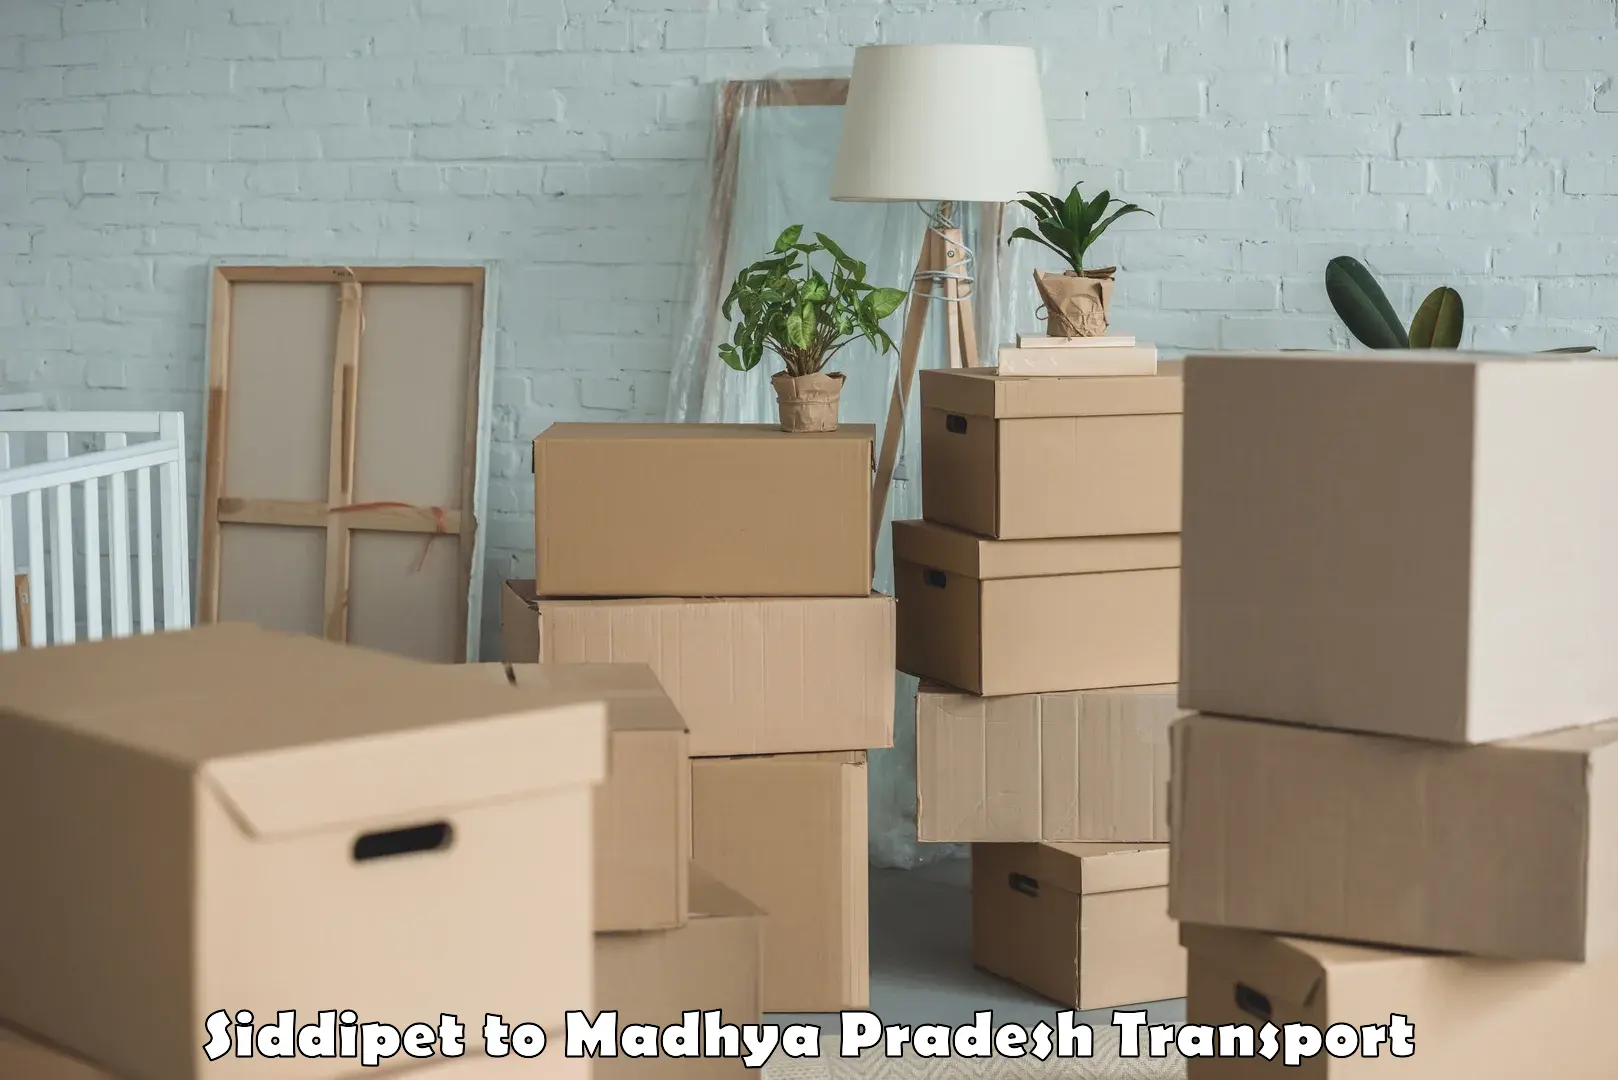 Part load transport service in India Siddipet to Sagar